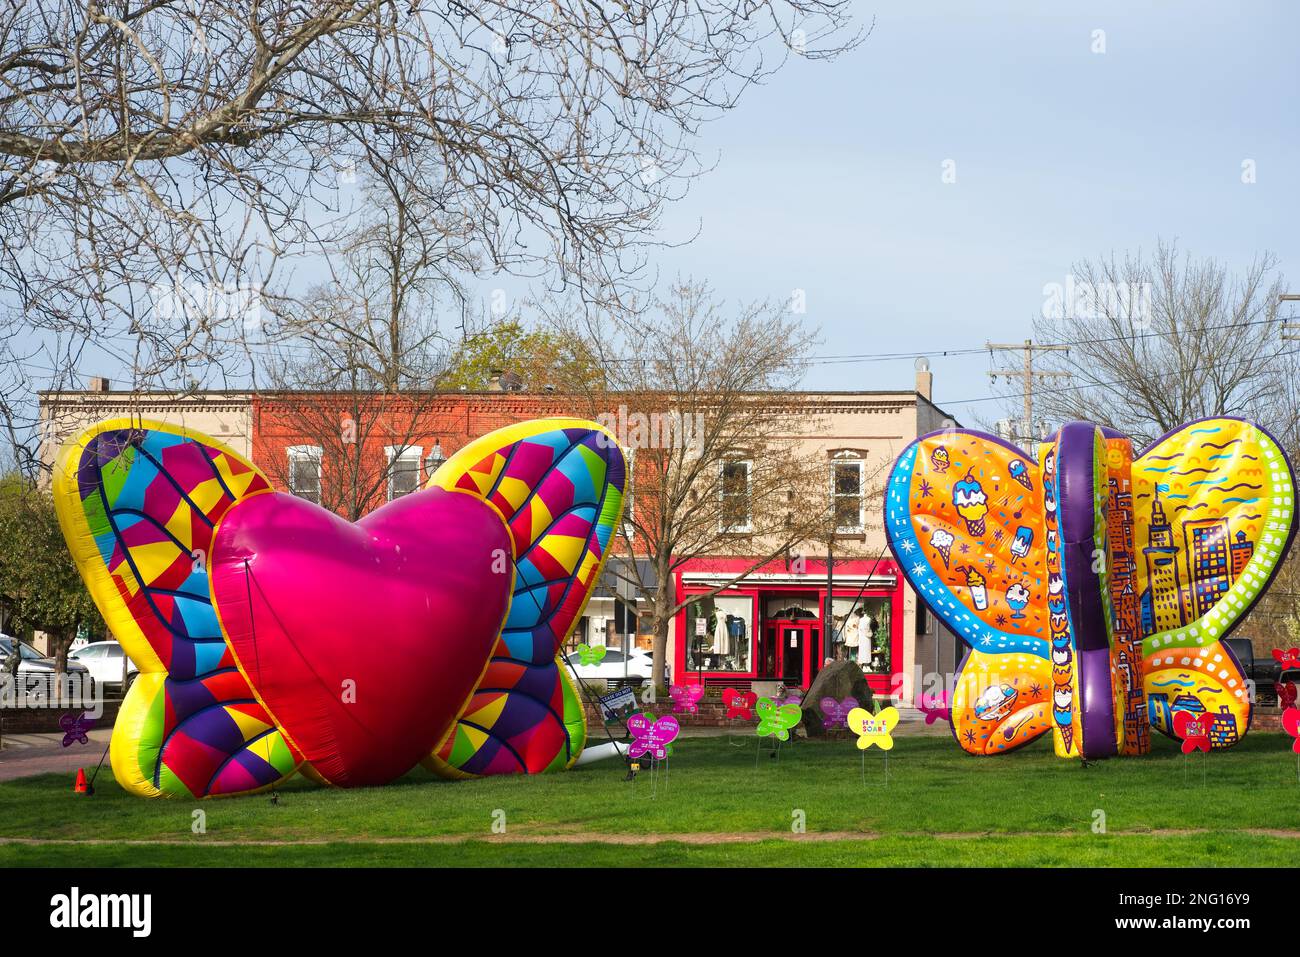 CHAGRIN FALLS, OH, USA - APRIL 30, 2022: For 12 days, this NE Ohio village was graced by an installation of inflatable butterflies placed by Hope Soar Stock Photo